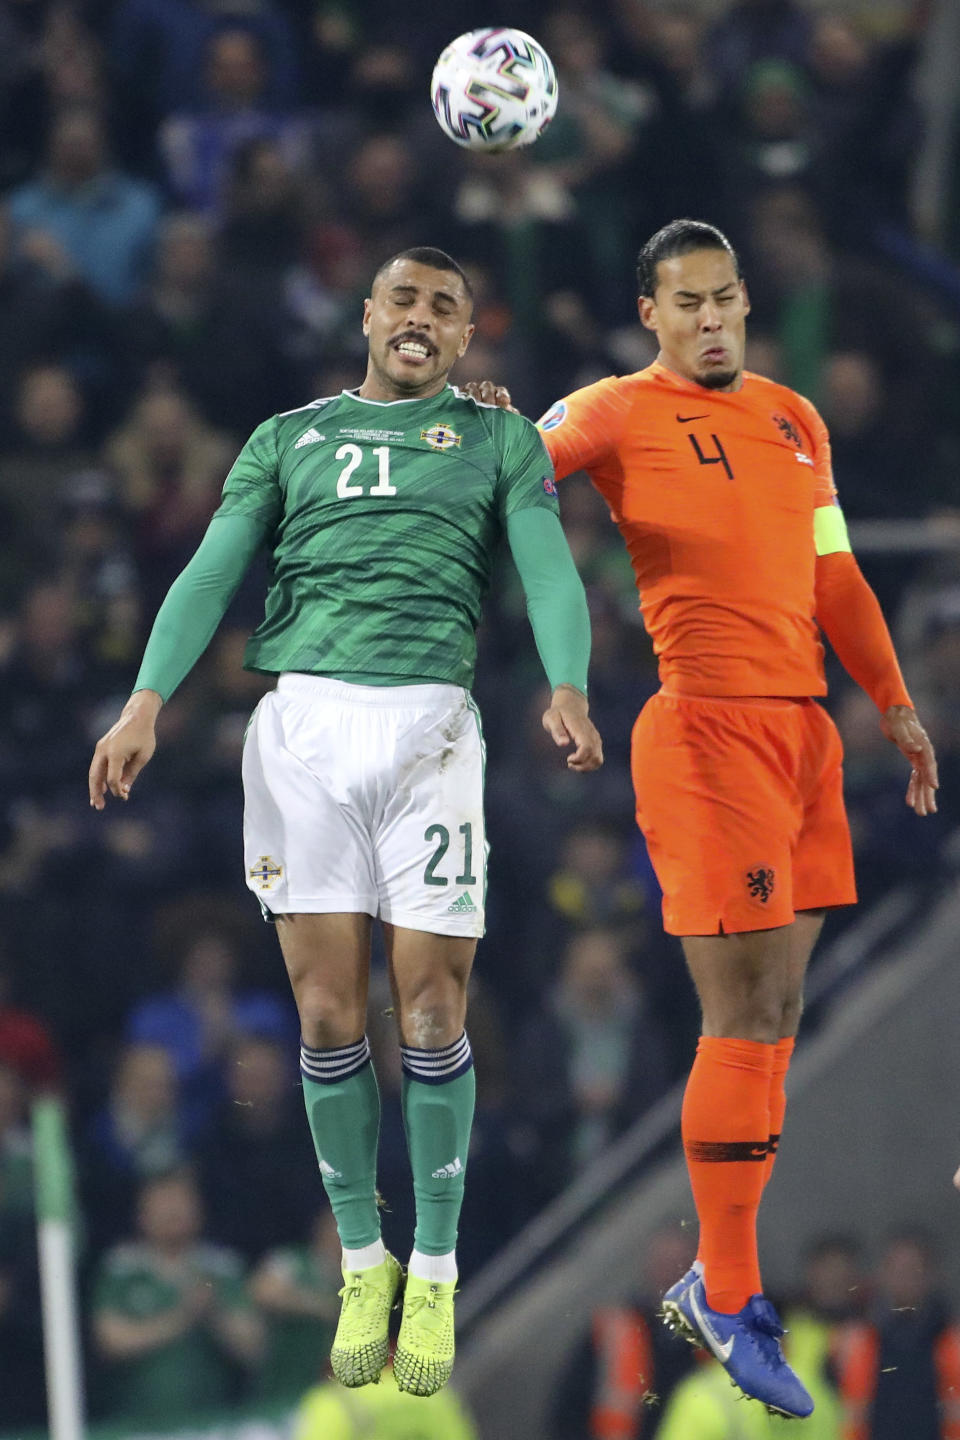 Northern Ireland's Josh Magennis jumps for the ball with Netherlands' Virgil Van Dijk, right, during the Euro 2020 group C qualifying soccer match between Northern Ireland and the Netherlands at Windsor Park, Belfast, Northern Ireland, Saturday, Nov. 16, 2019. (AP Photo/Peter Morrison)